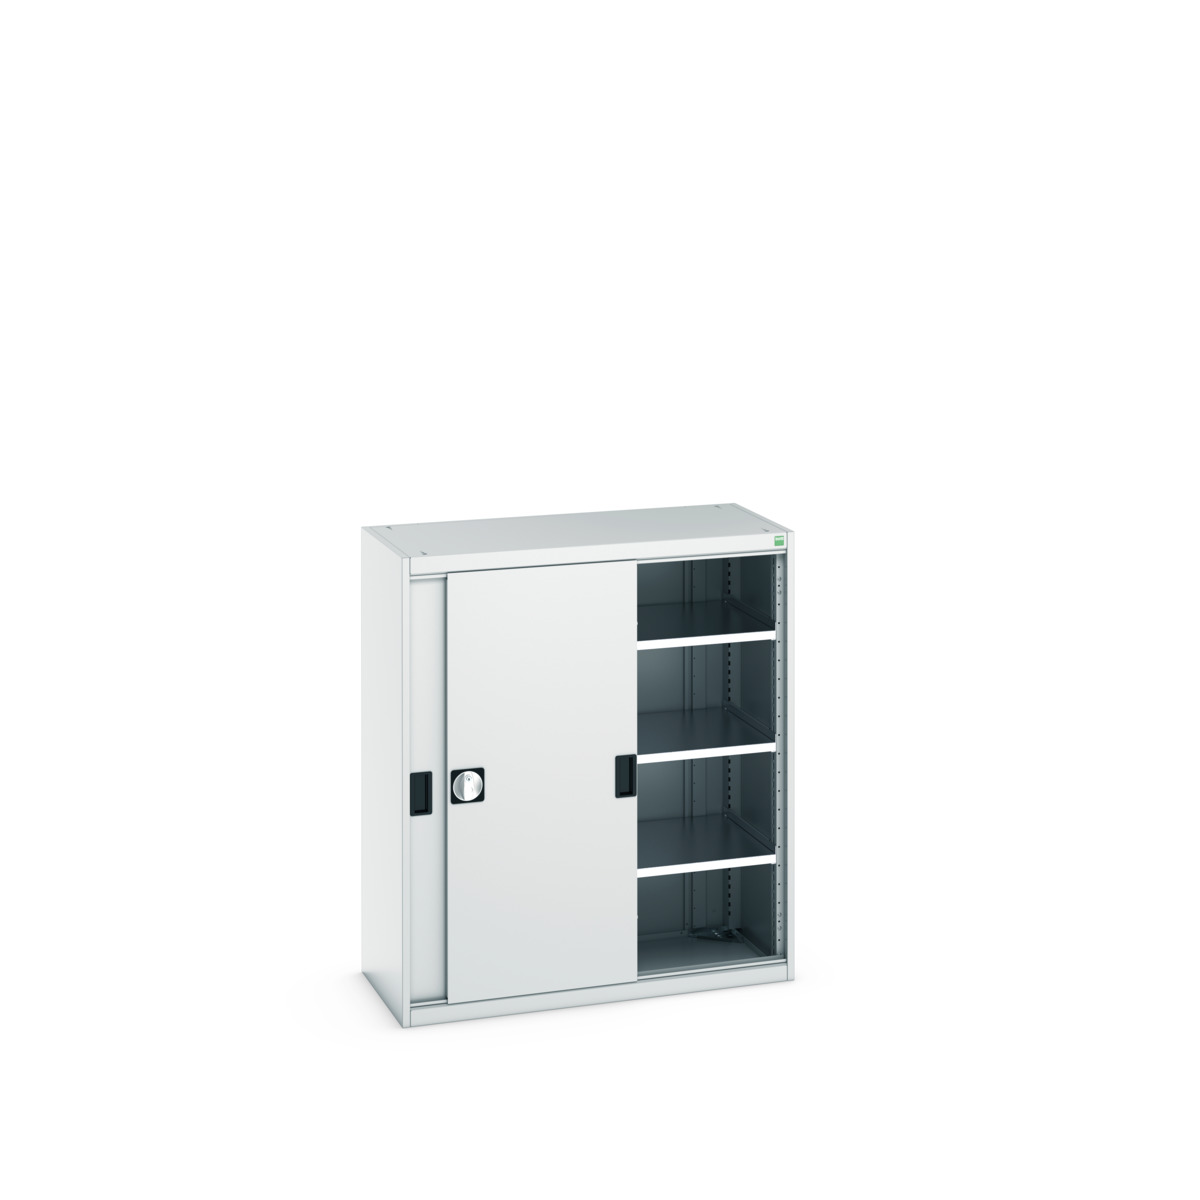 40013069.16V - Armoire Cubio SMS-10512-1.1